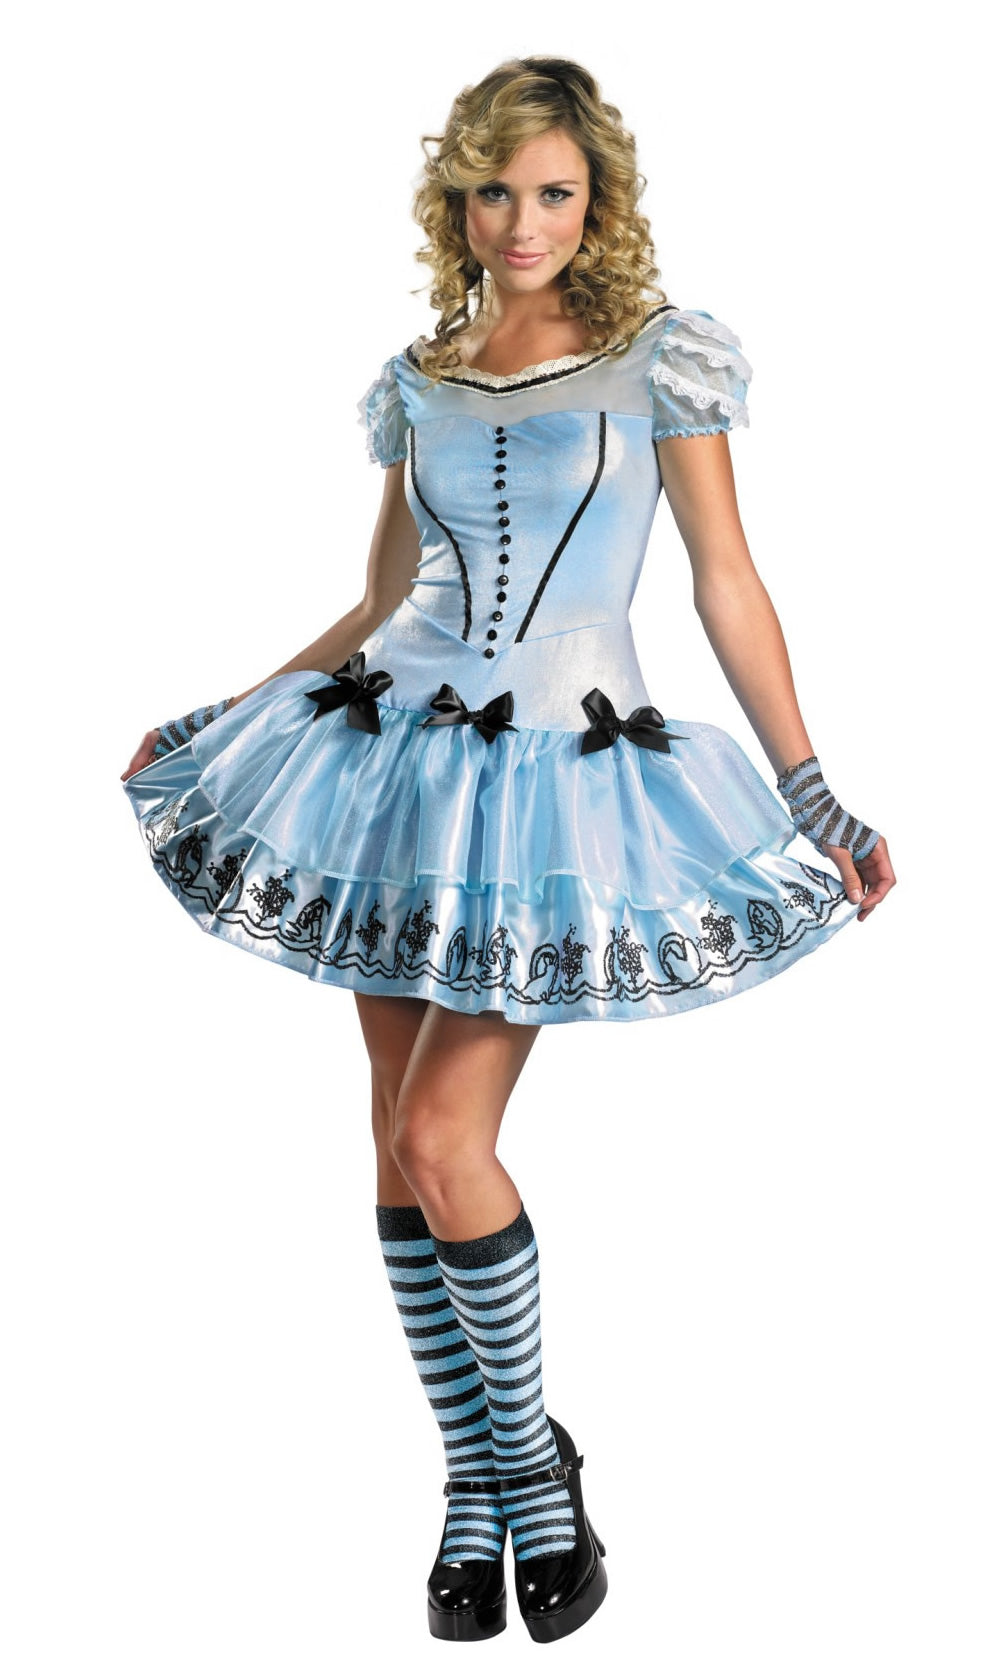 Short Alice dress with black bows, gloves and socks